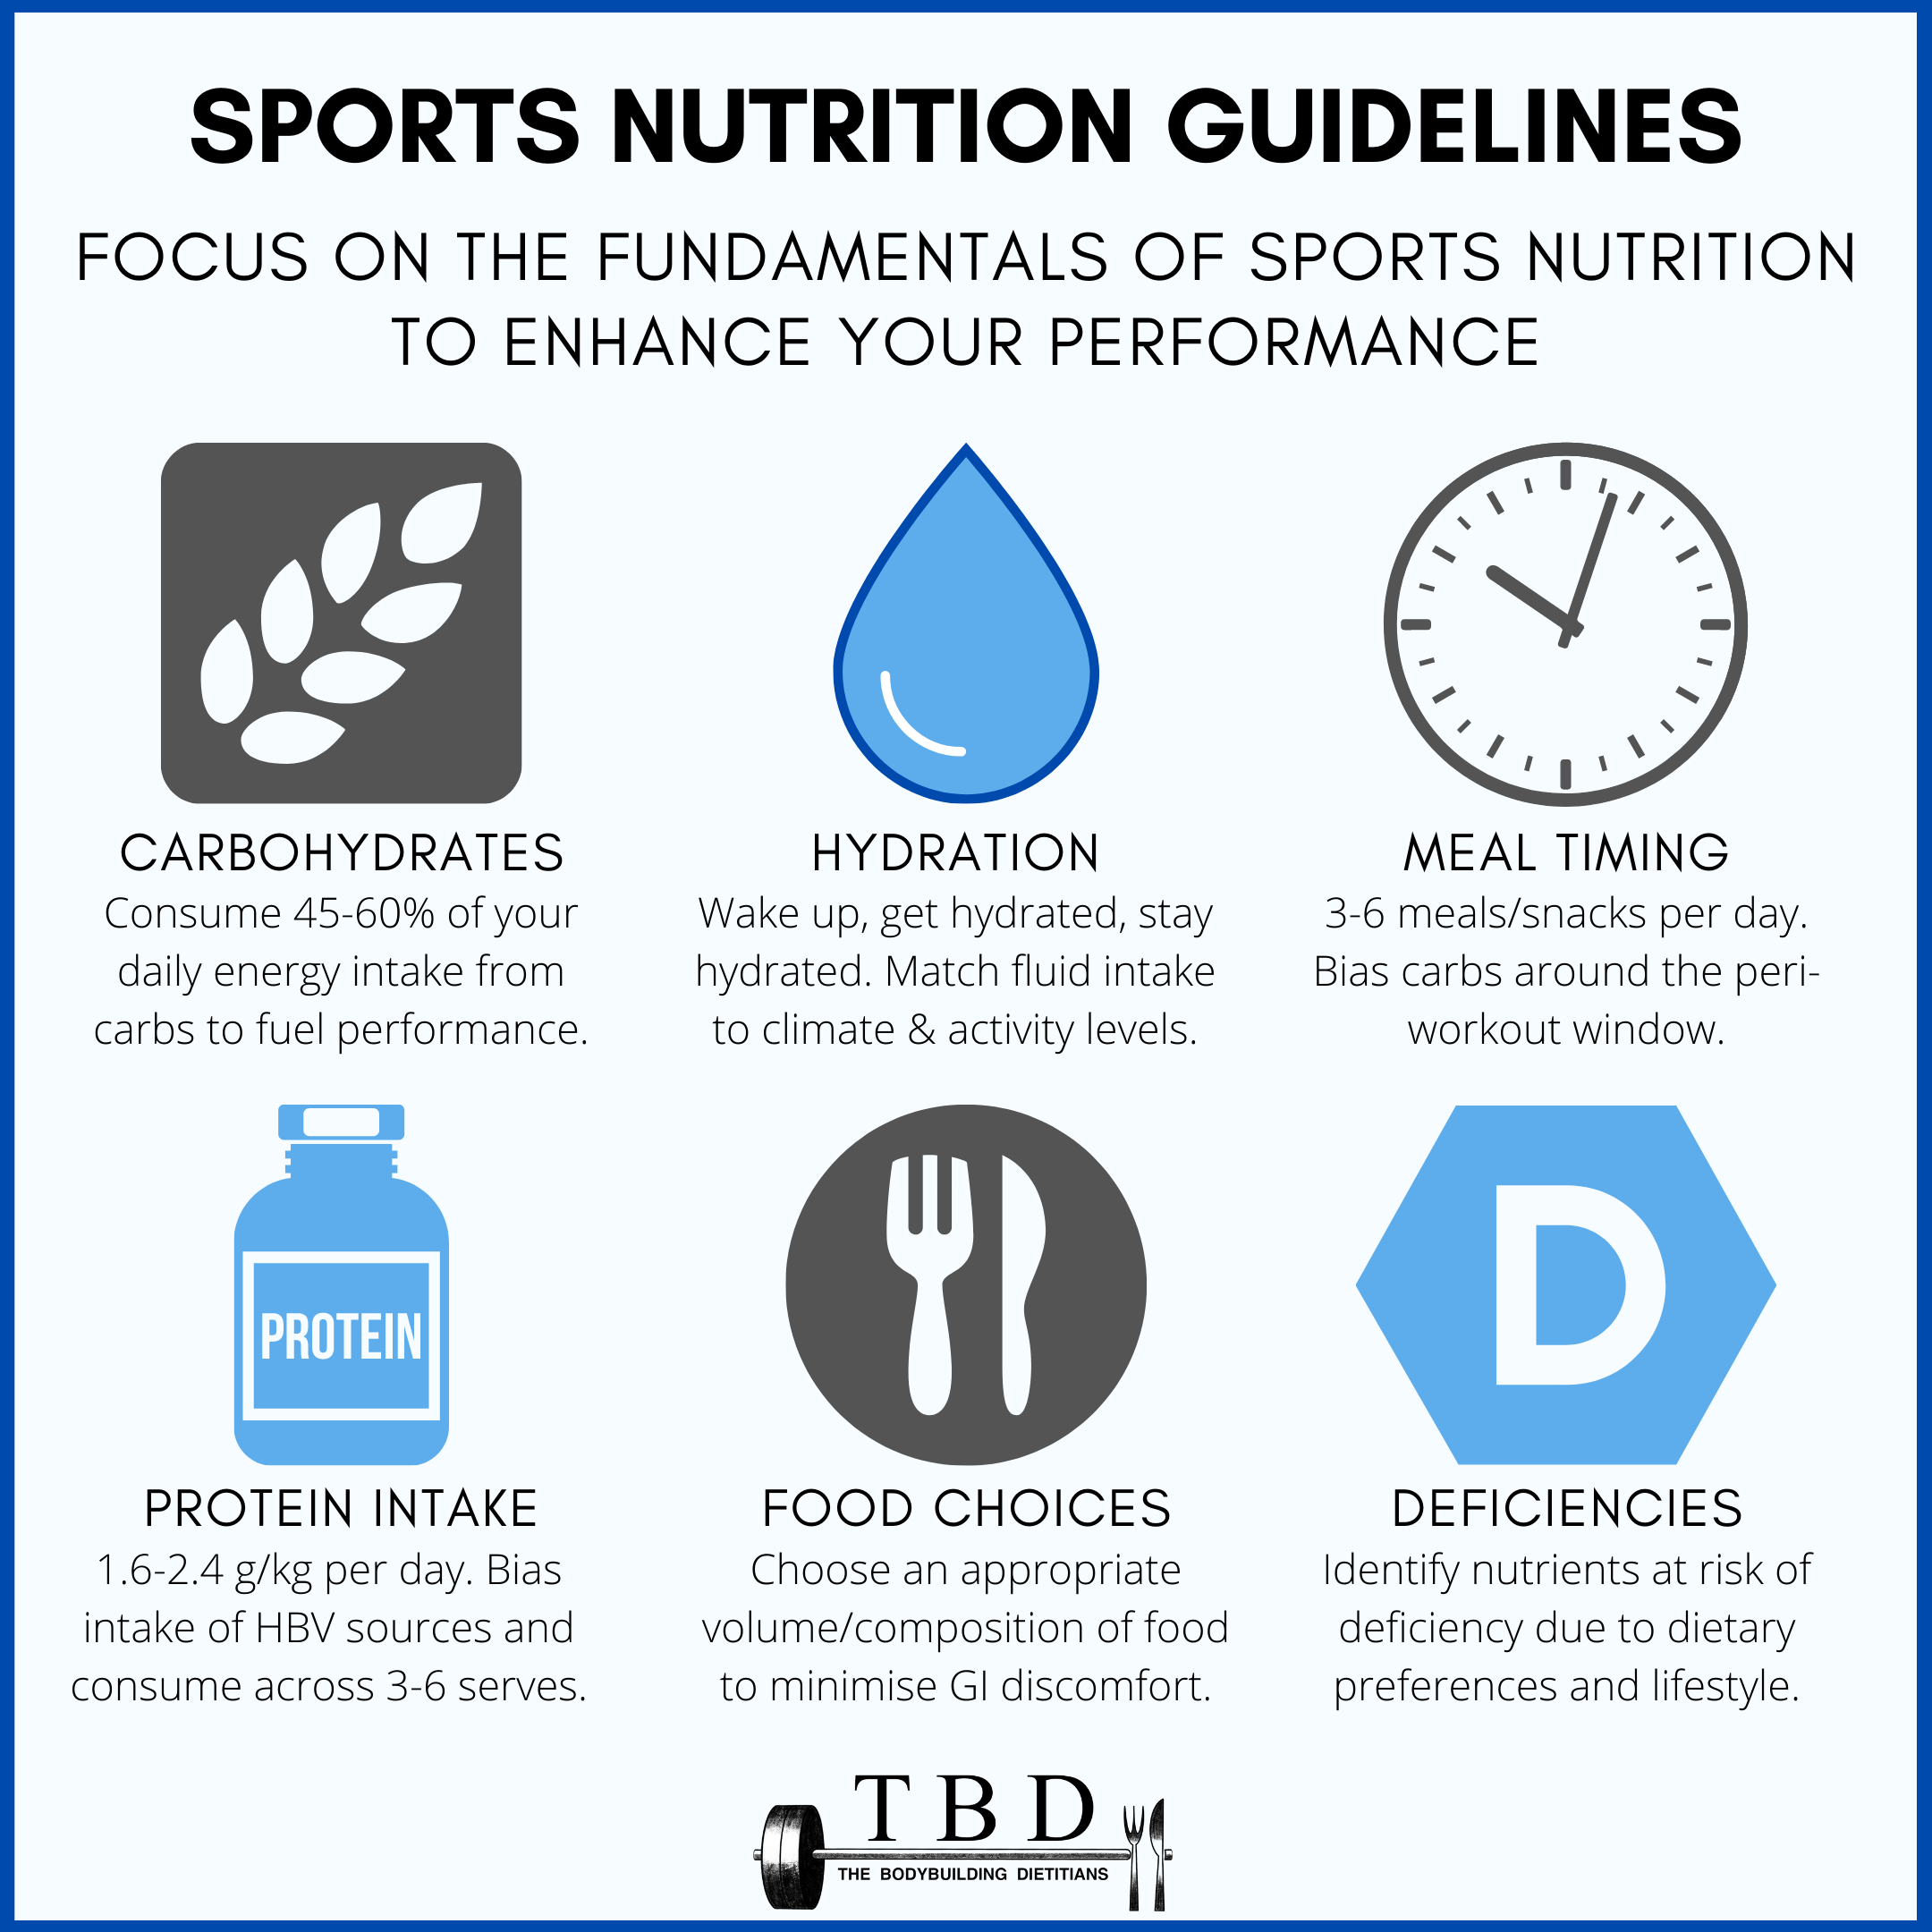 Sports nutrition guidelines for aging bodies